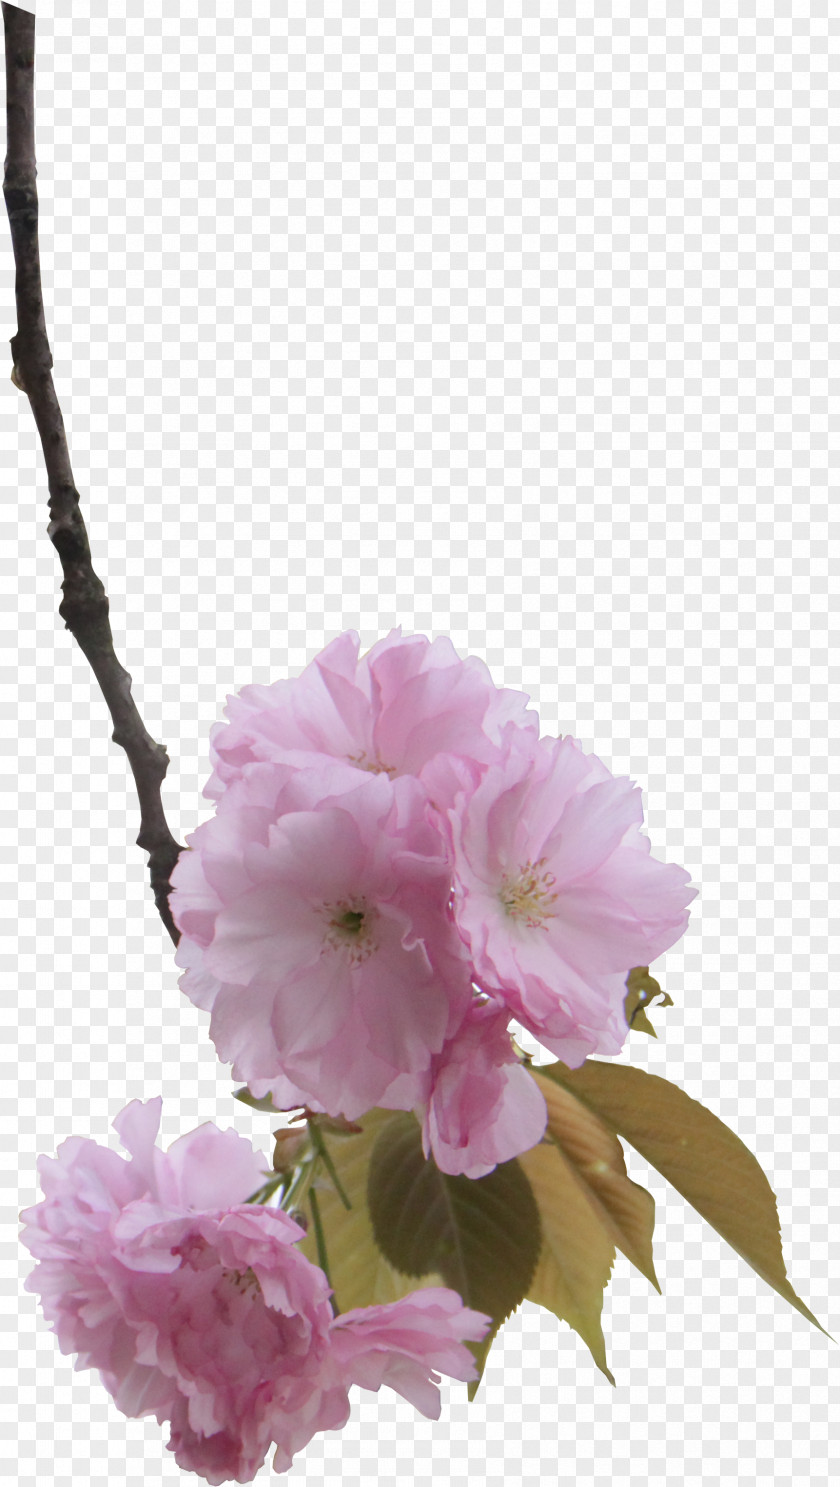 Growth In The Branches Of Cherry Blossoms Pink Blossom Floral Design PNG